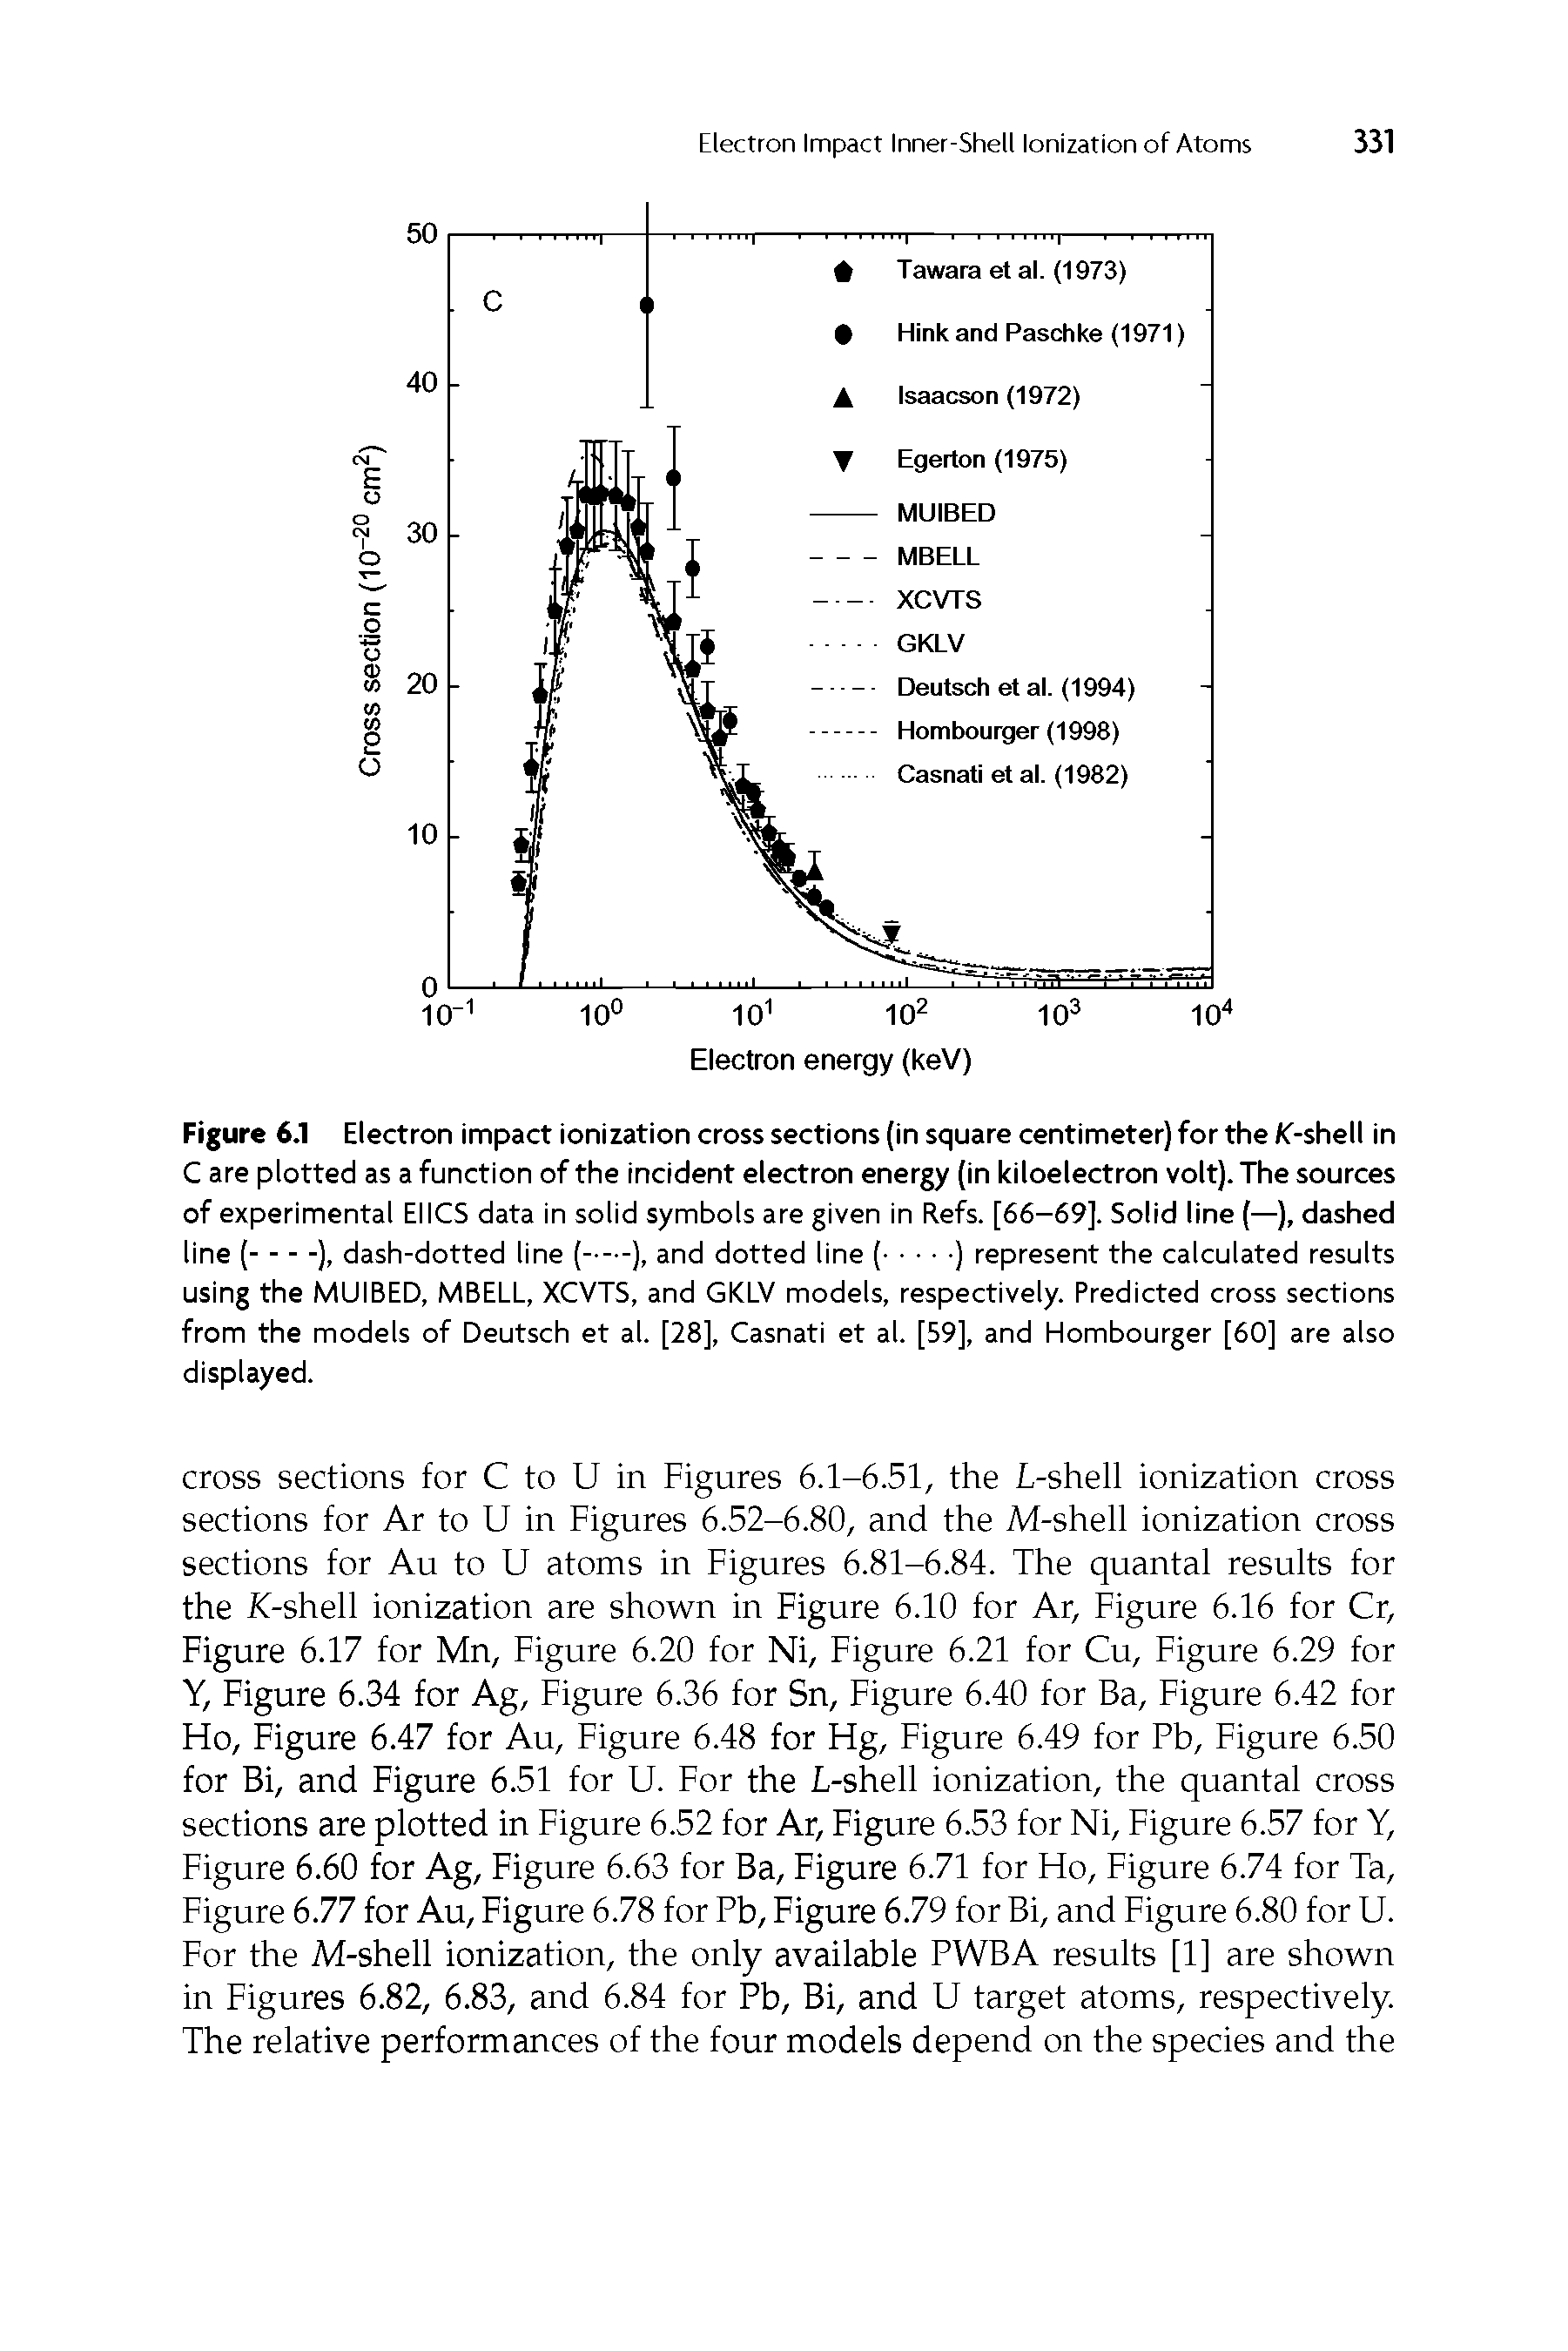 Figure 6.1 Electron impact ionization cross sections (in square centimeter) for the /f-shell in C are plotted as a function of the incident electron energy (in kiloelectron volt). The sources of experimental El ICS data in solid symbols are given in Refs. [66-69]. Solid line (—), dashed...